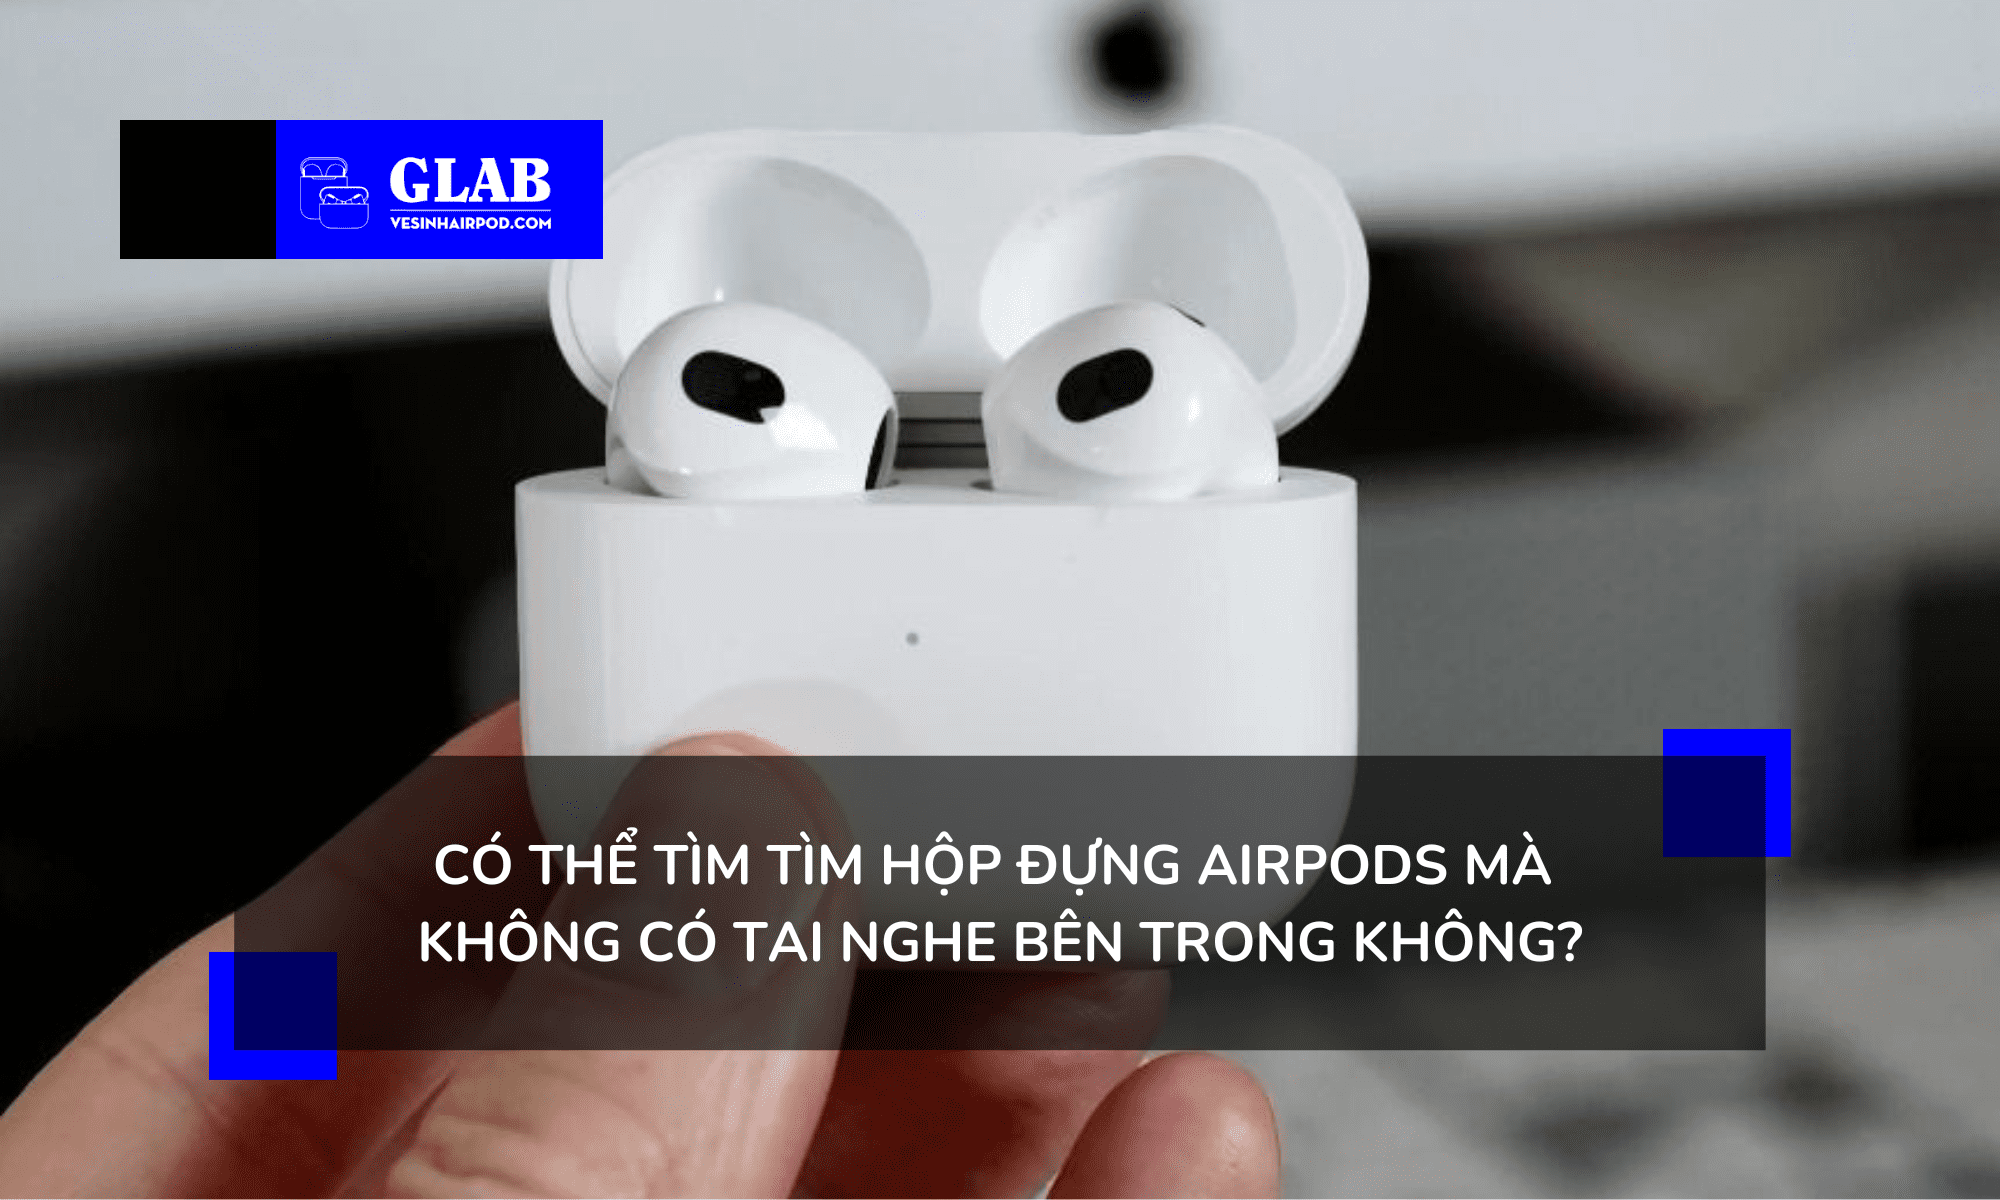 cach-tim-hop-dung-airpods